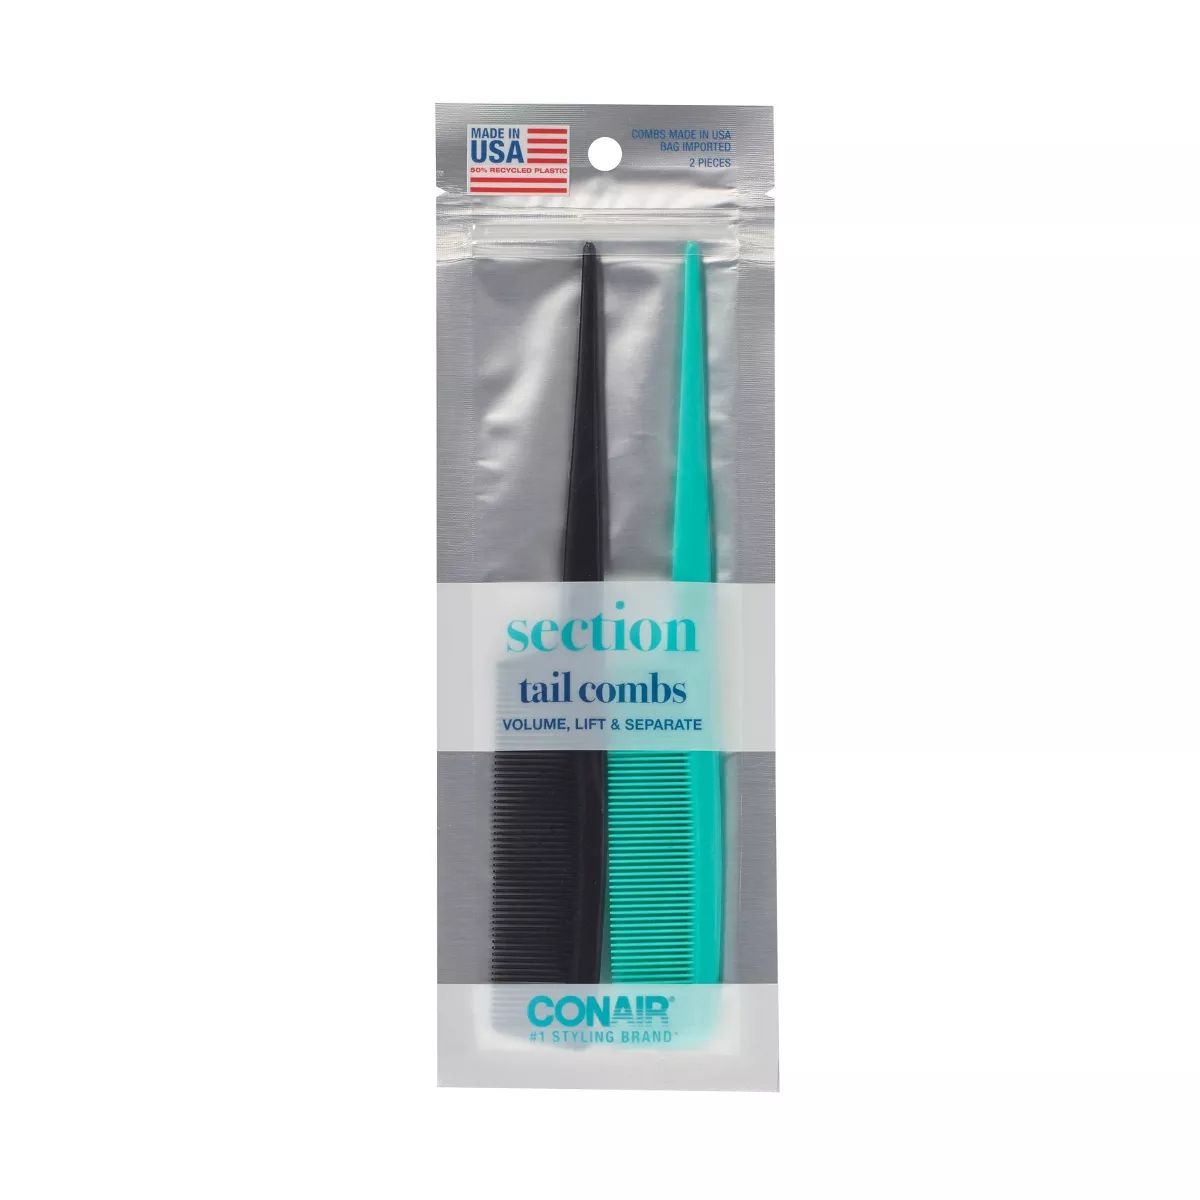 Conair Volume, Lift, and Separate Fine-Tooth Tail Combs - Black/Teal - 2pk | Target